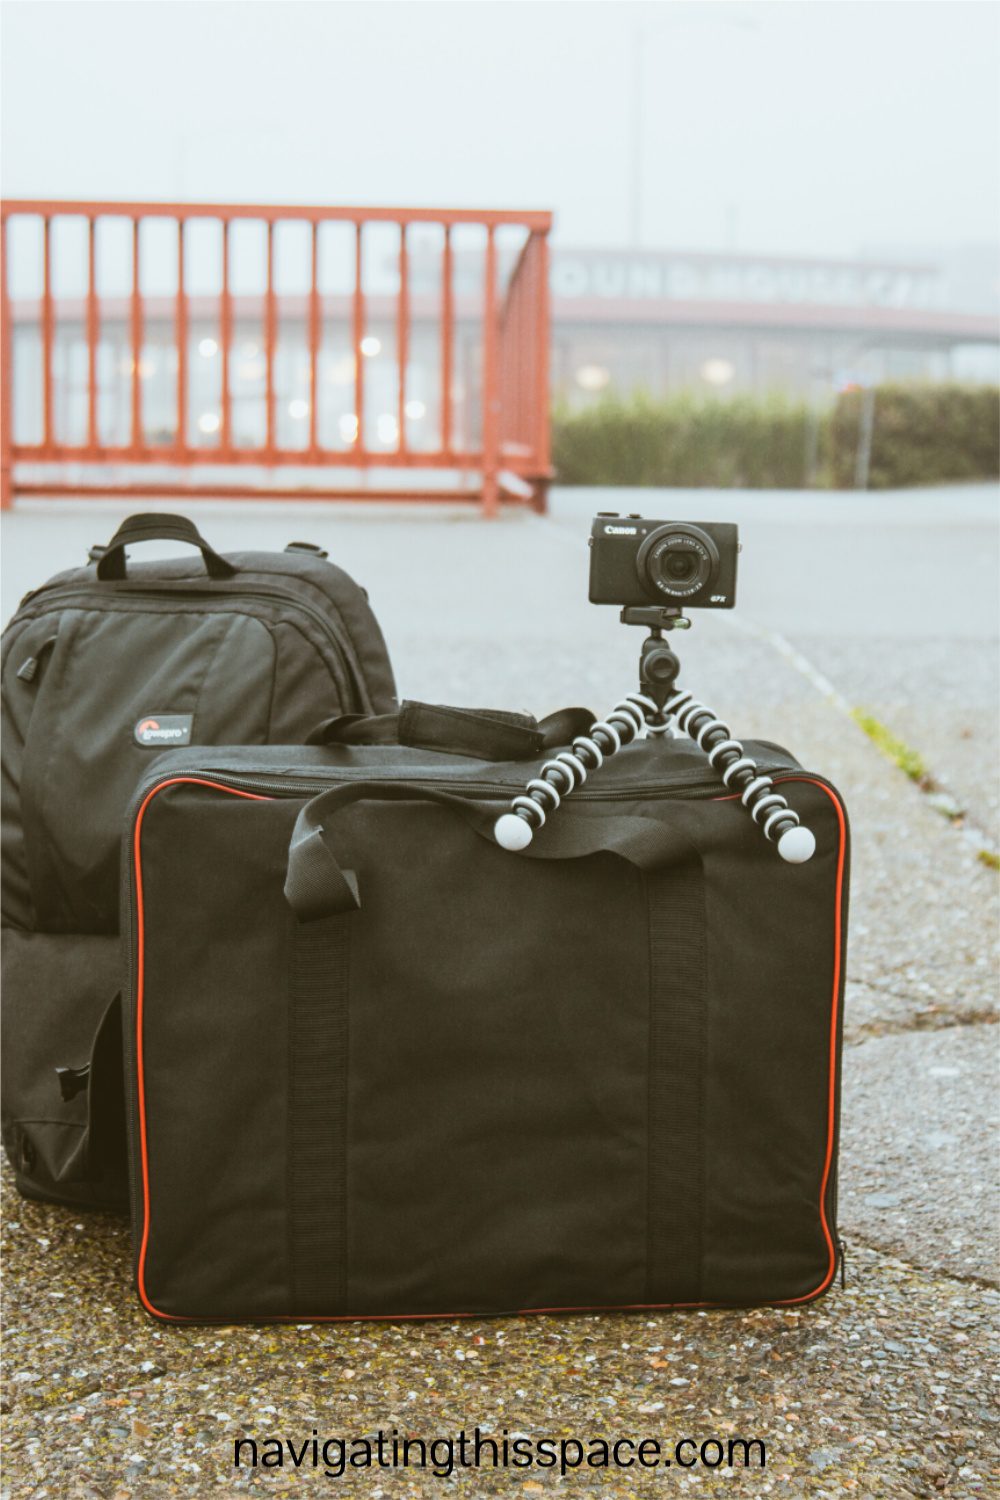 Two luggage bags and a camera on a mini tripod sitting on a pavement